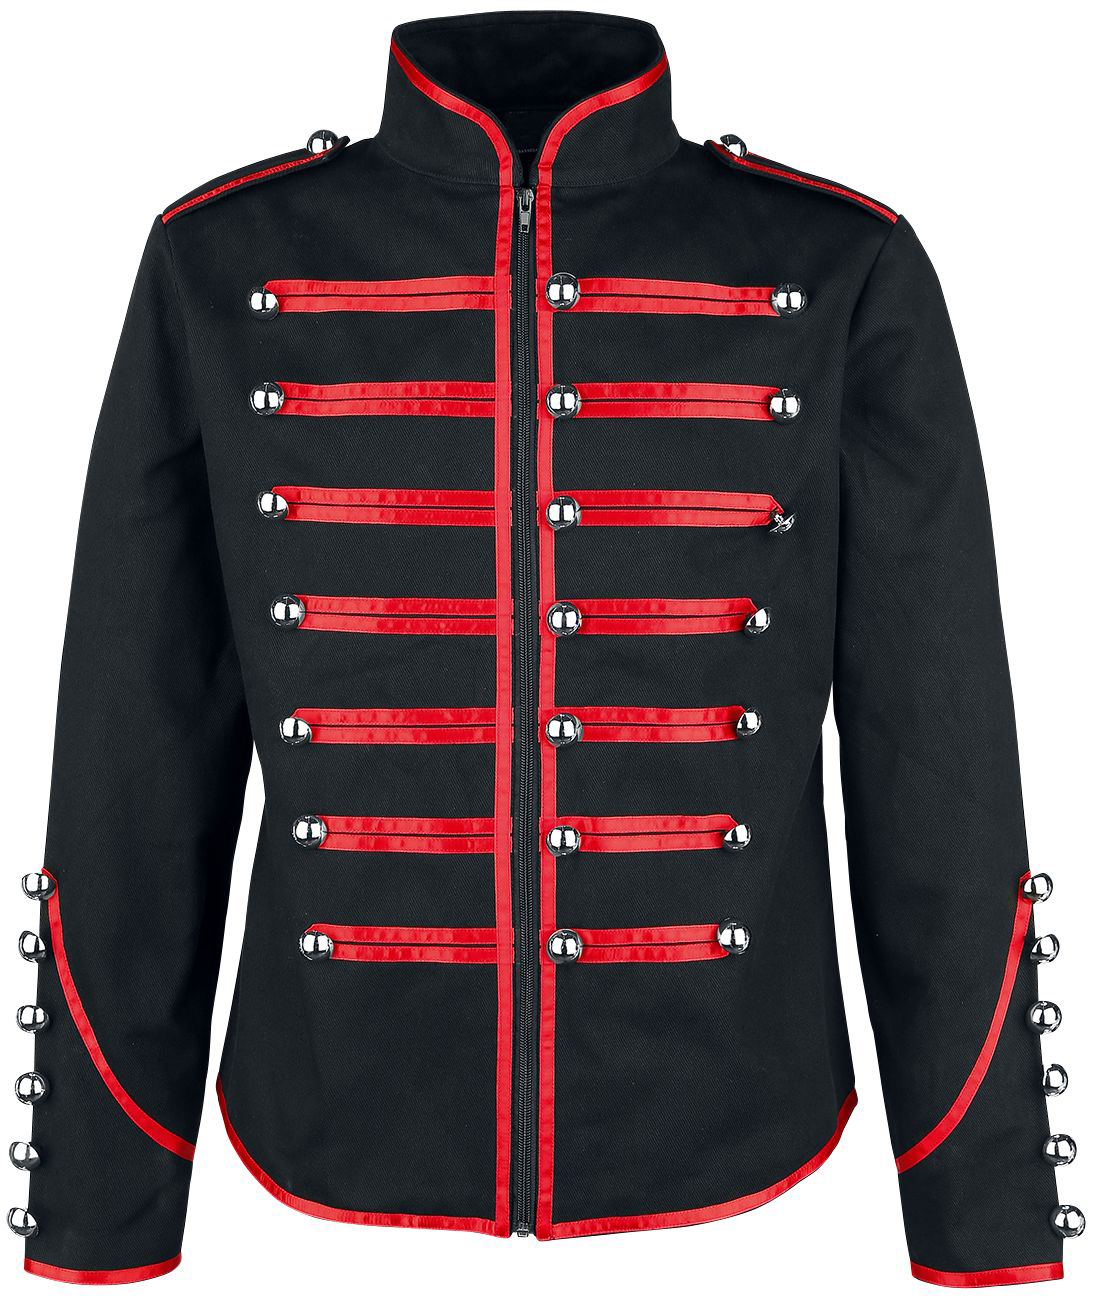 Men Red Parade Military Jacket Steampunk Marching Drummer Jacket